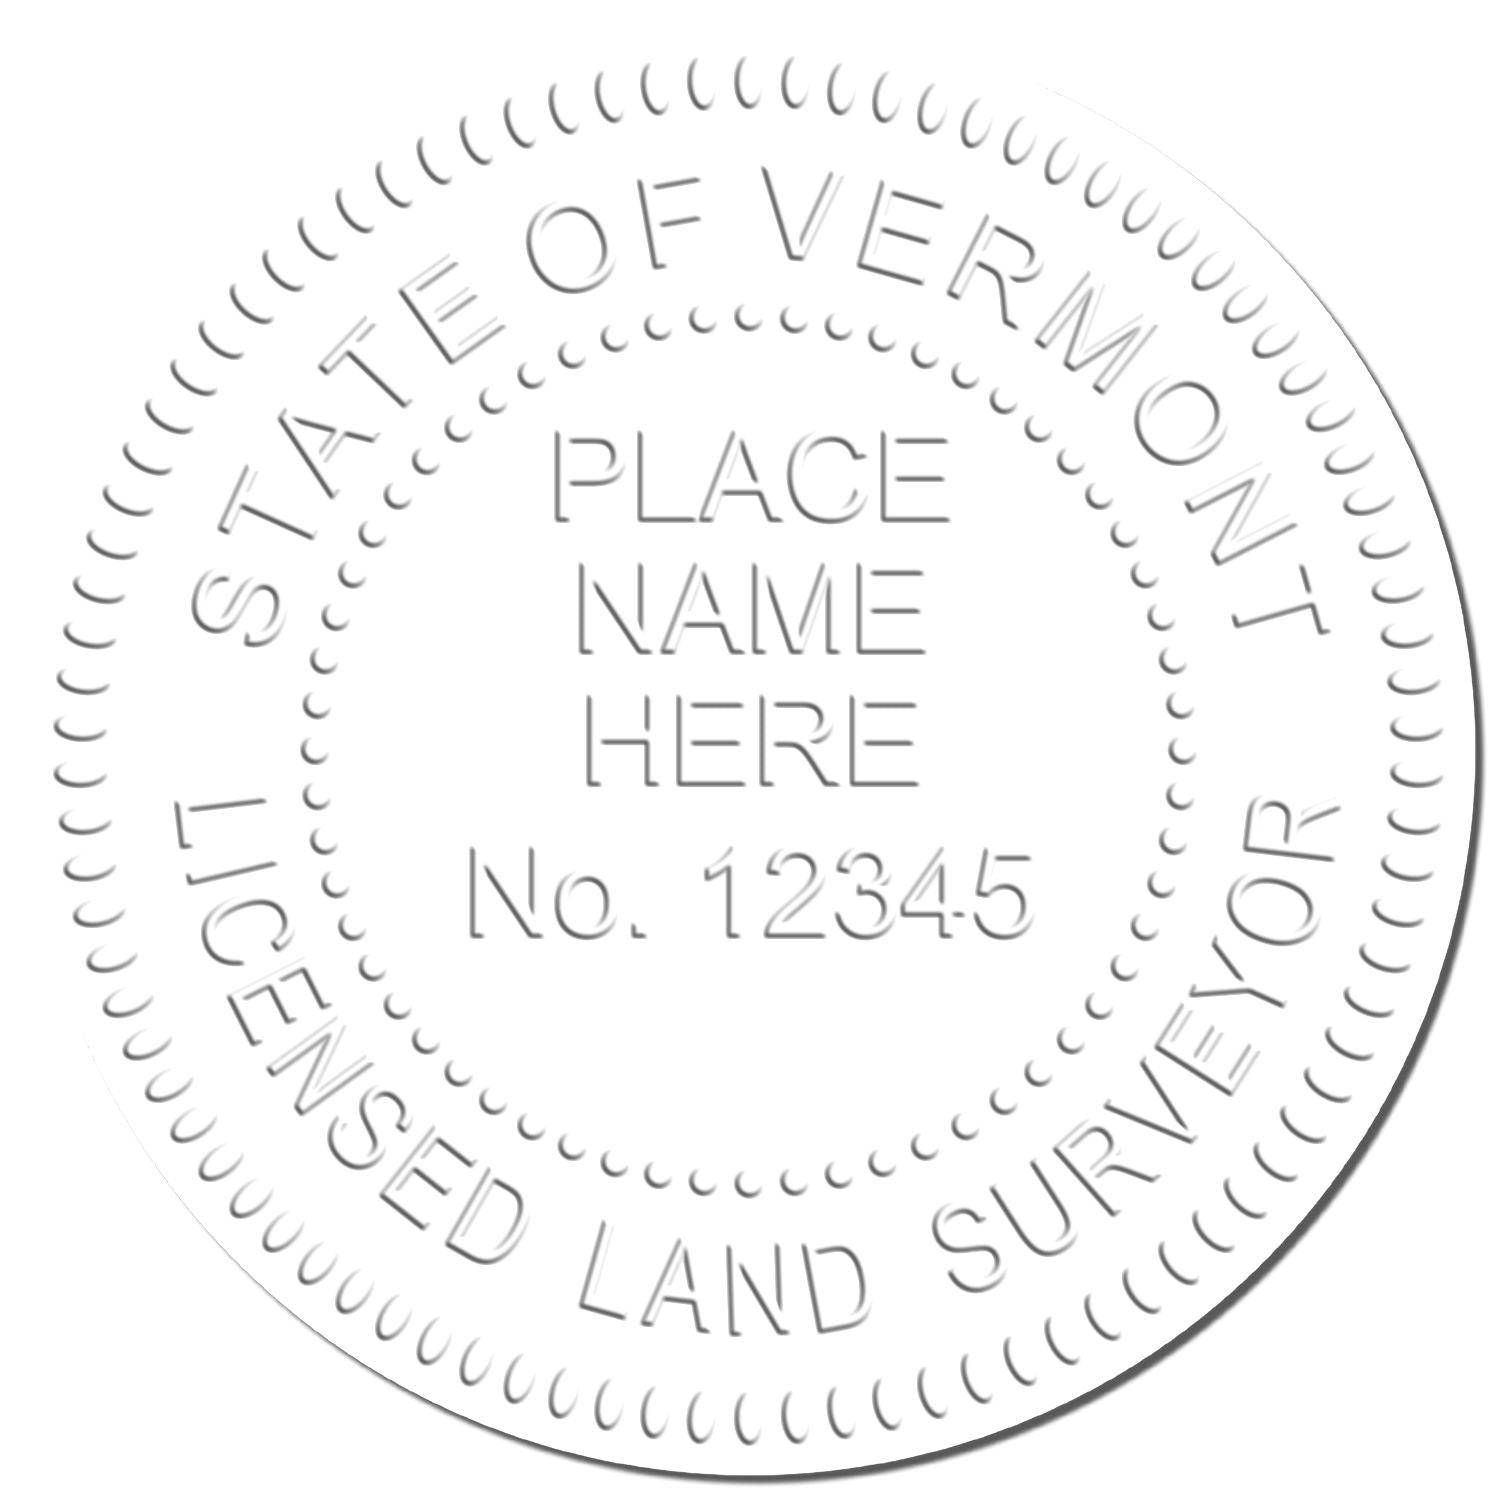 This paper is stamped with a sample imprint of the Long Reach Vermont Land Surveyor Seal, signifying its quality and reliability.